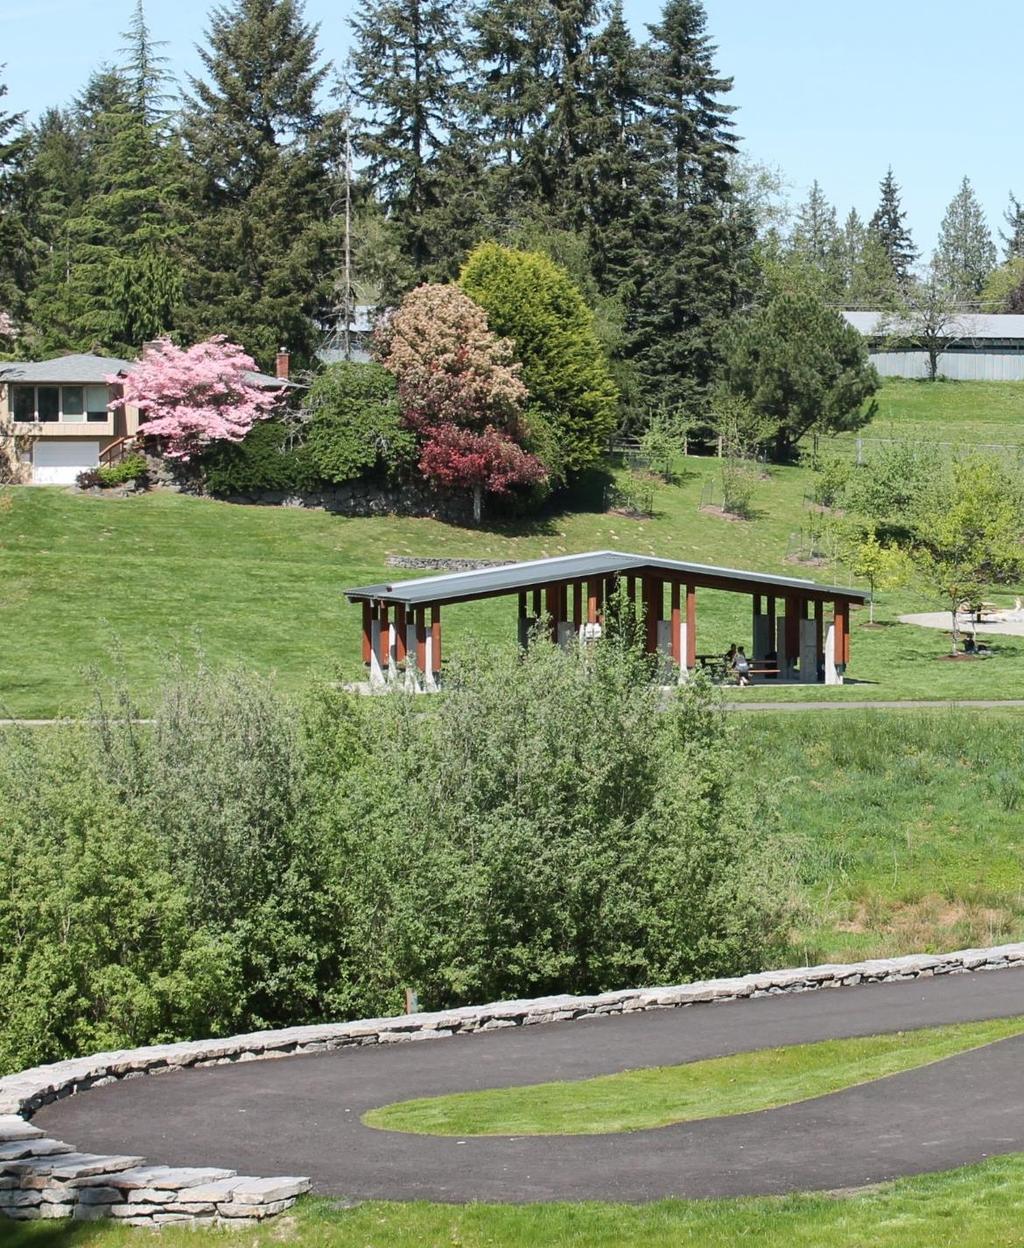 King County / City of Sammamish Interlocal Mitigation Funds Mitigation Funds must be used for Parks, open space, gardens, gateways, natural corridor addition Wildlife habitat